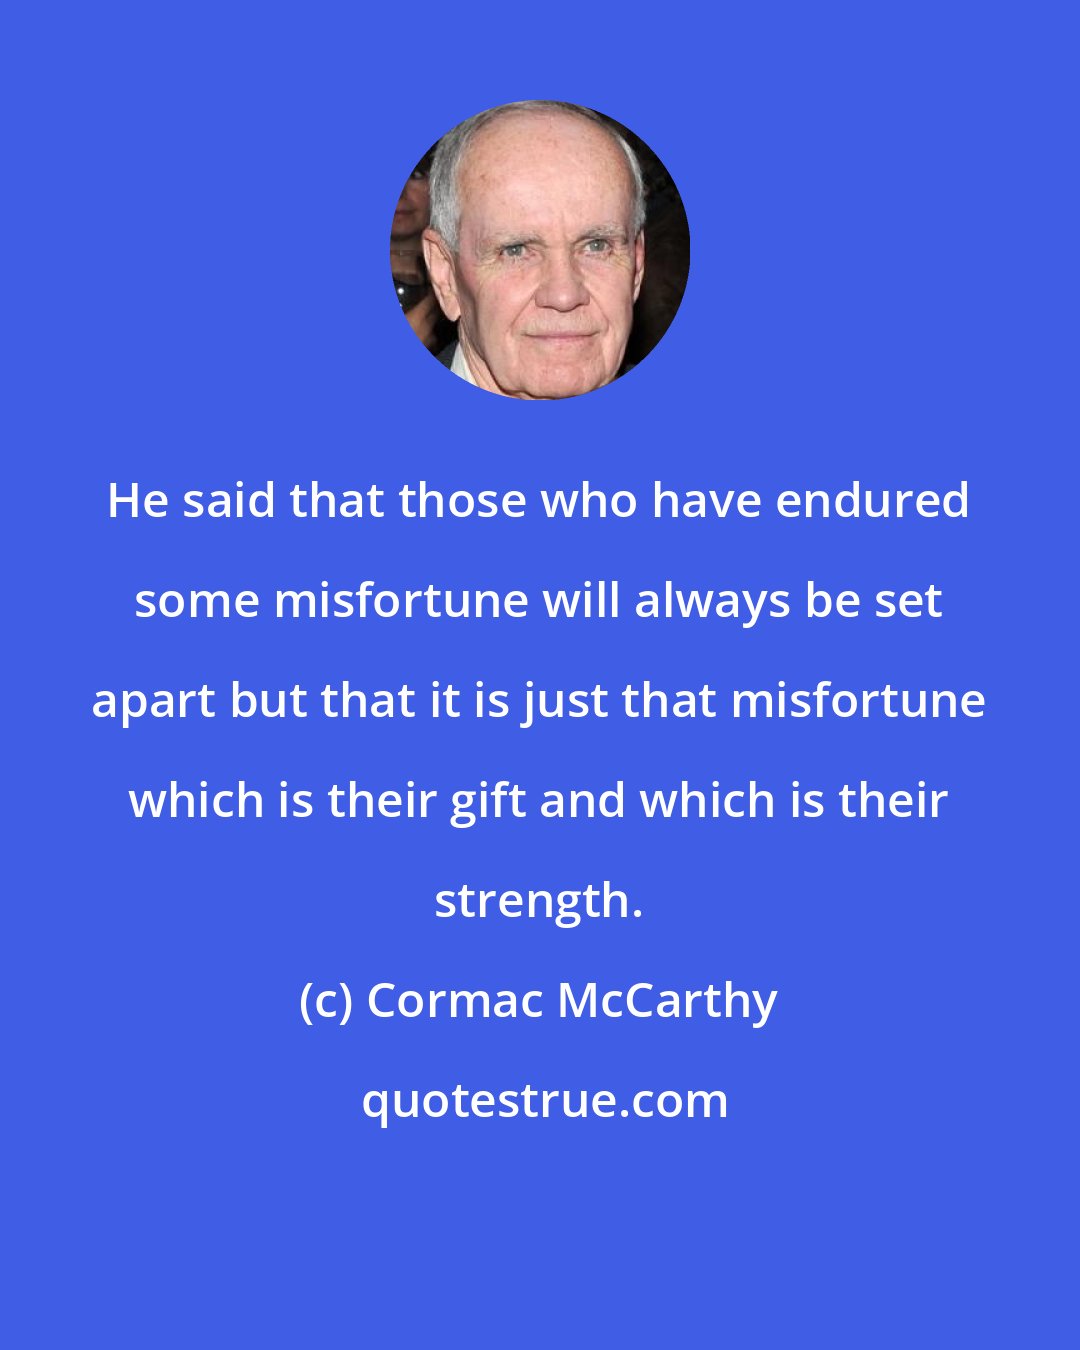 Cormac McCarthy: He said that those who have endured some misfortune will always be set apart but that it is just that misfortune which is their gift and which is their strength.